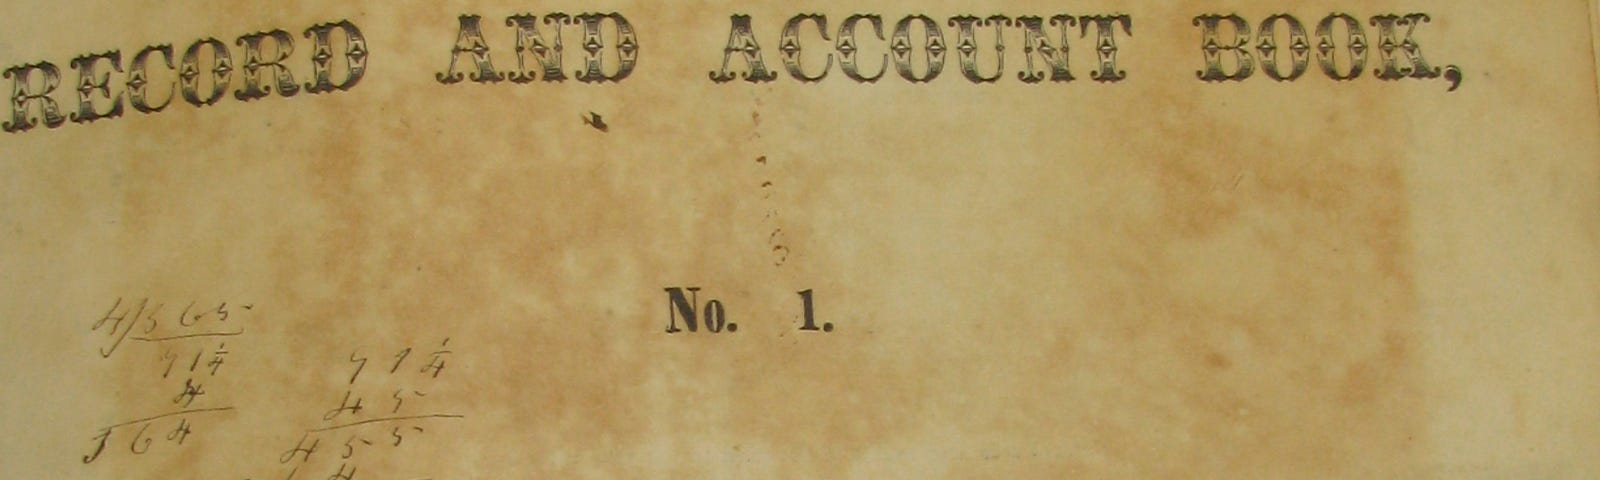 Thomas Affleck’s best-selling “Cotton Plantation Record and Account Book”, a guidebook for managing plantations in the South.